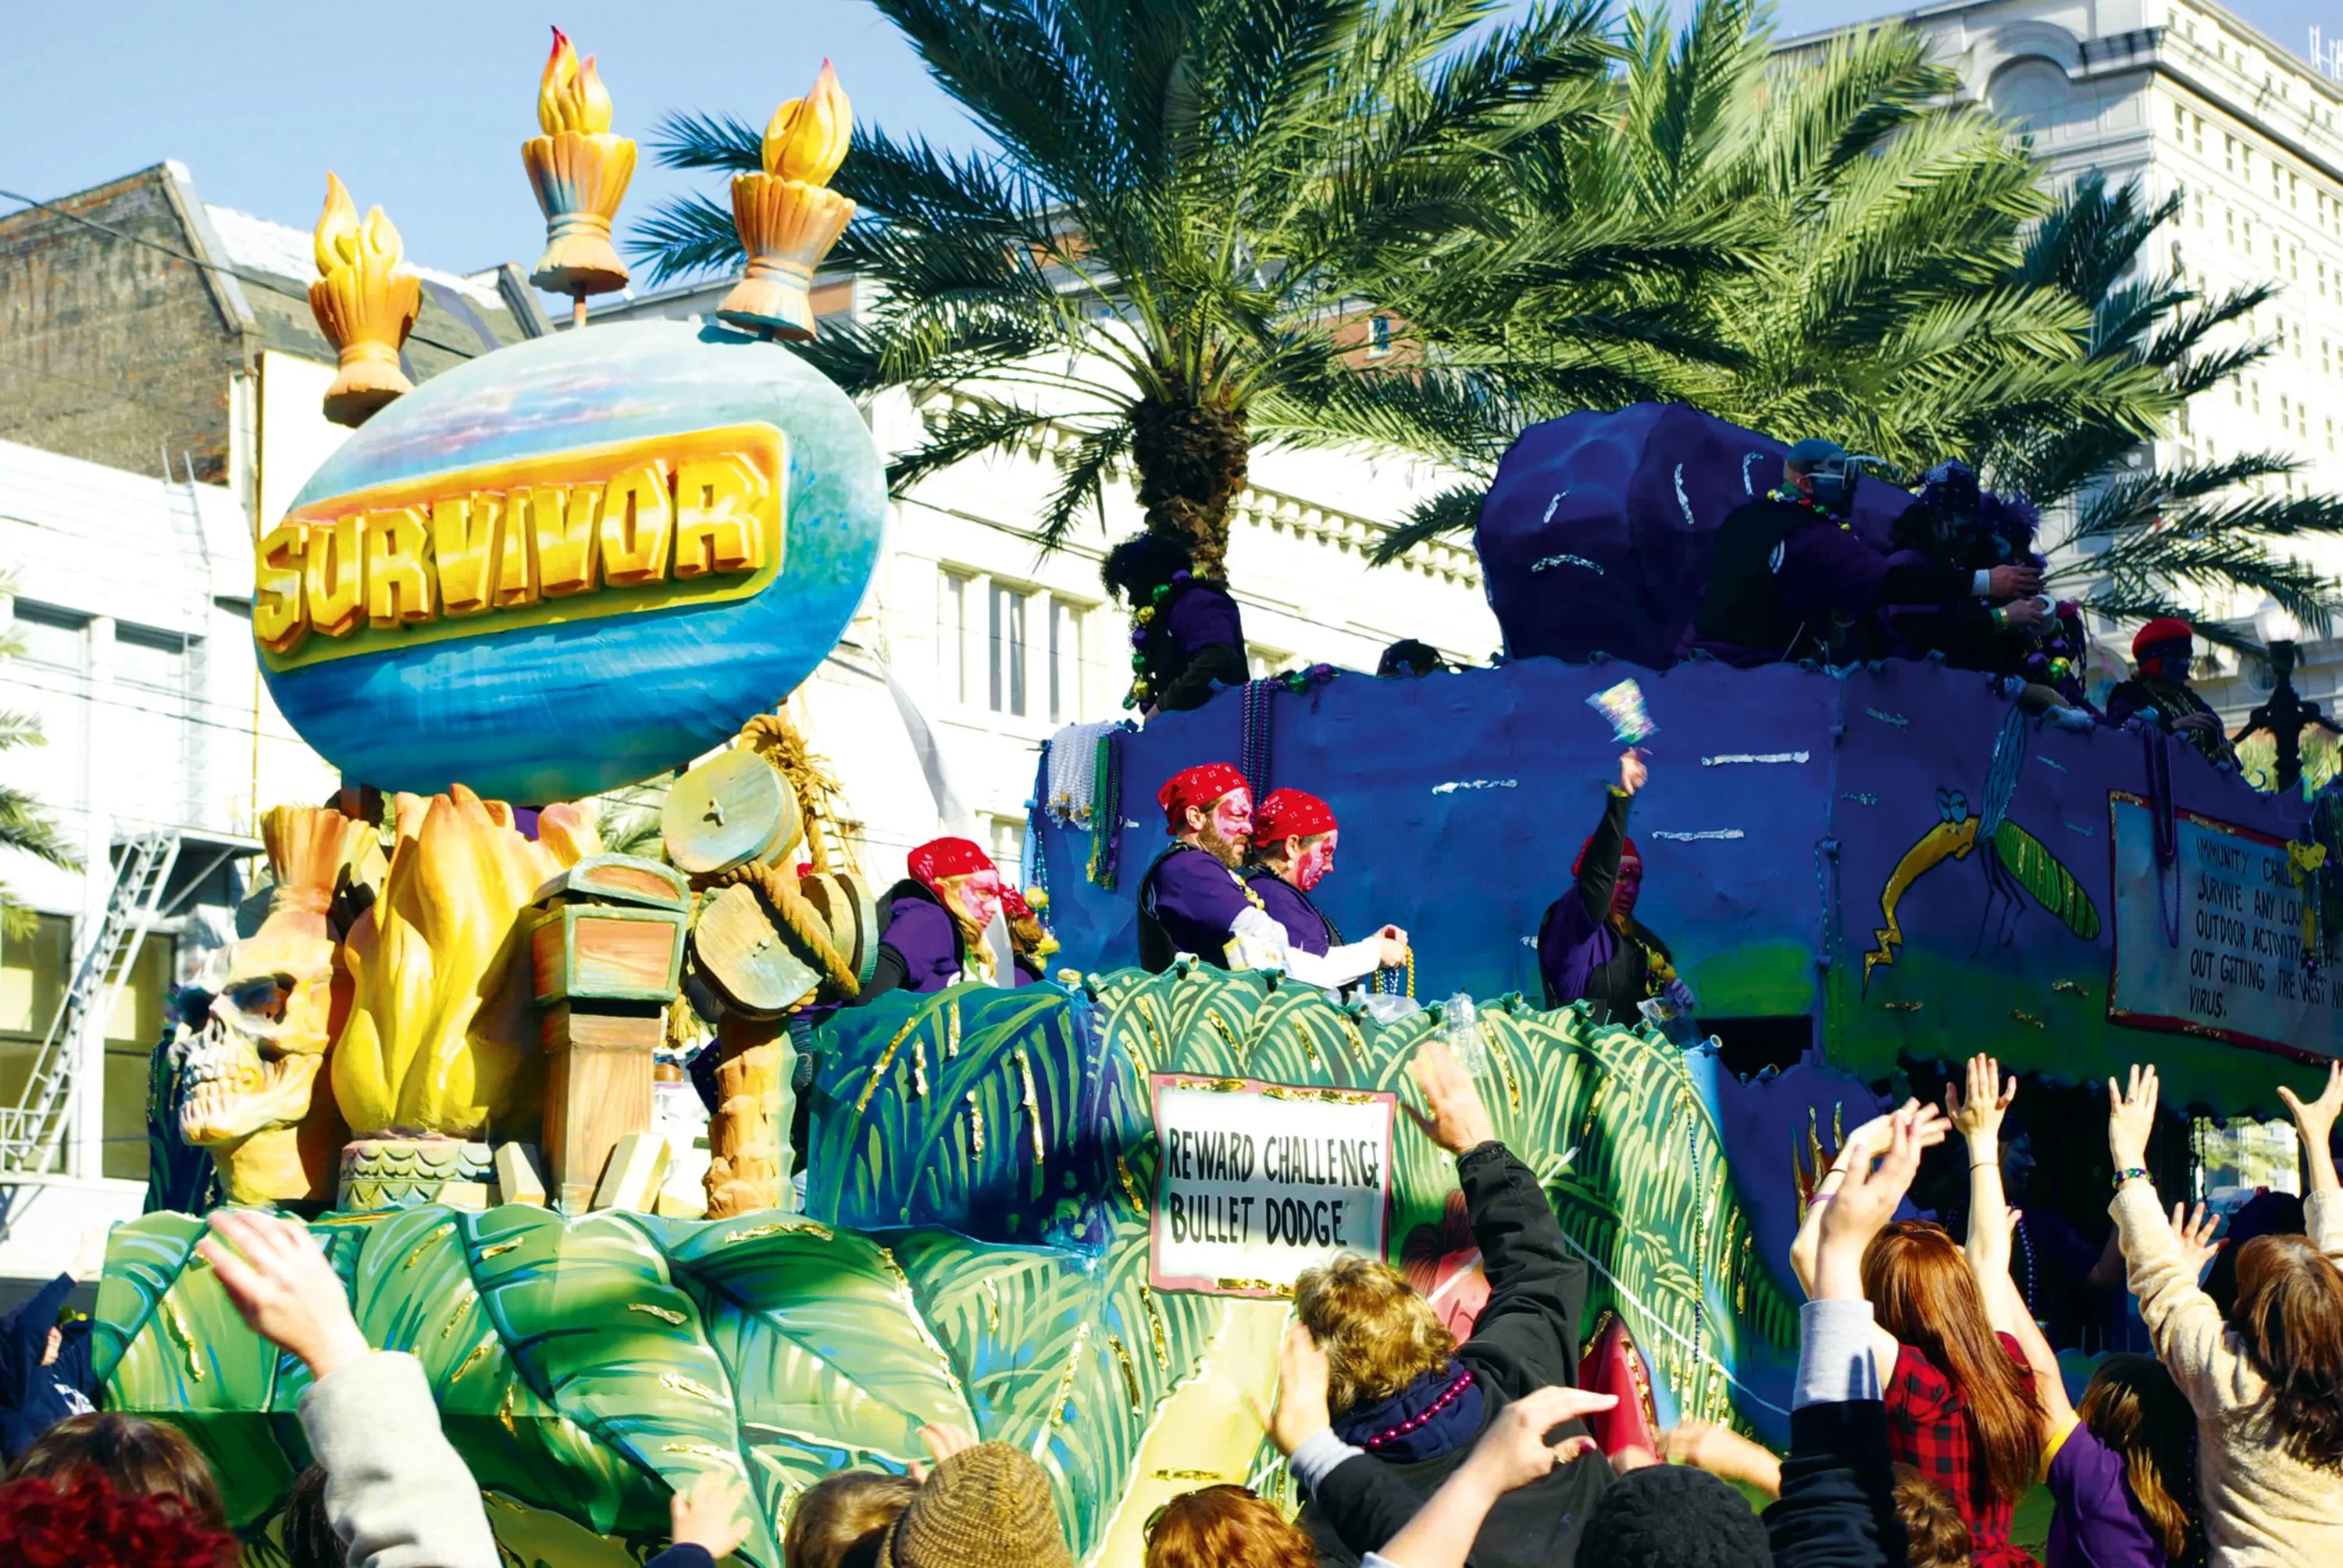 A float in the Krewe of Tucks parade, New Orleans, Mardi Gras 2010.